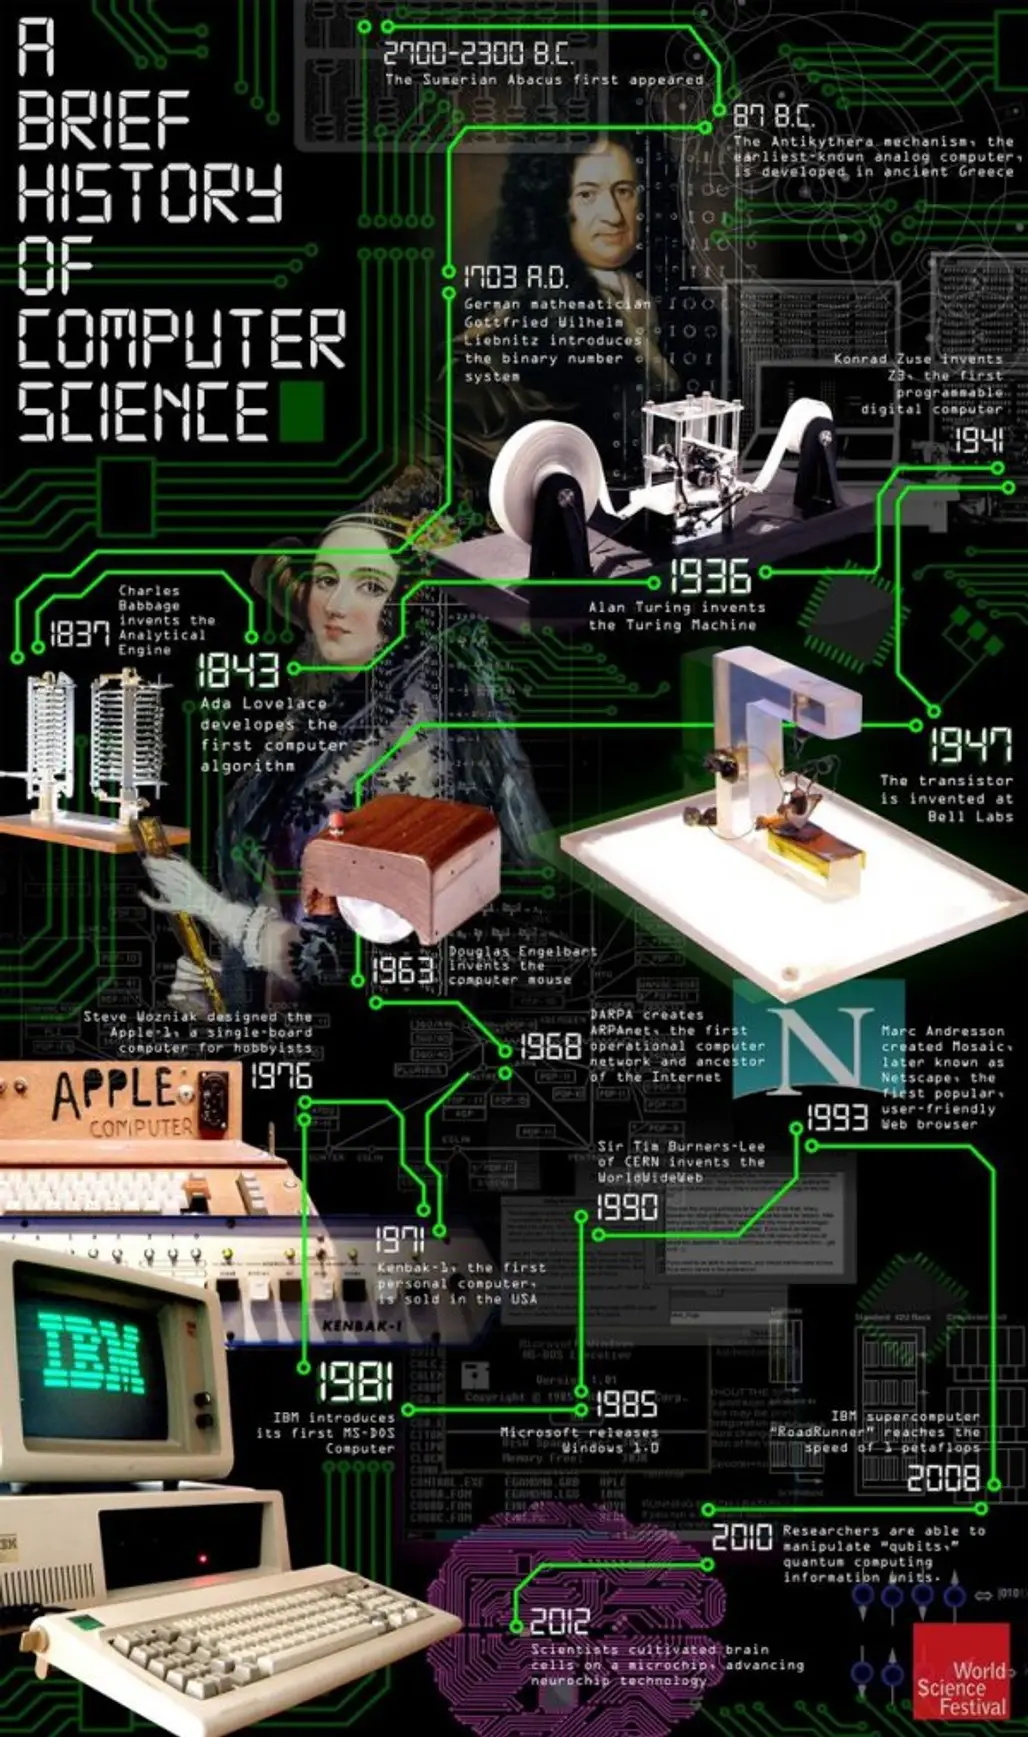 A Brief History of Computer Science